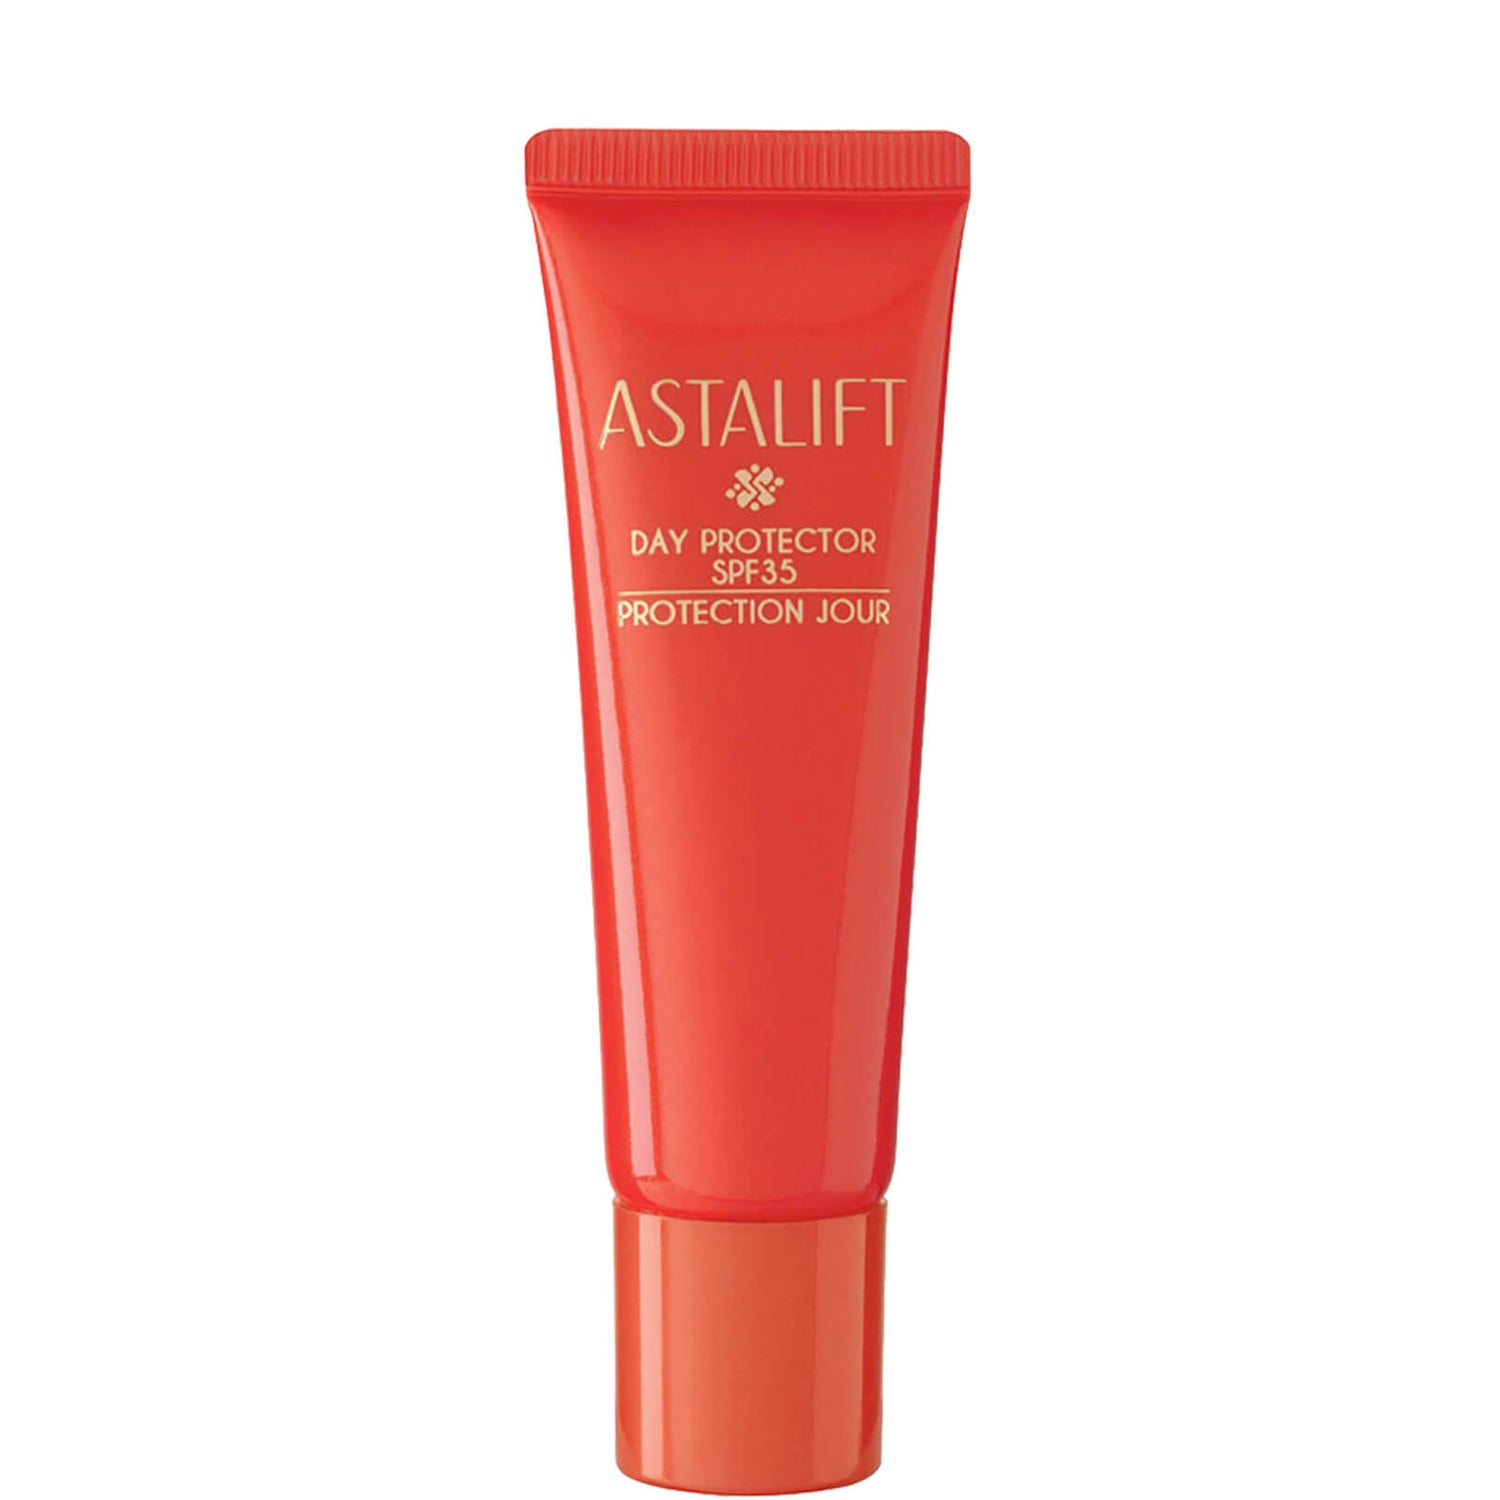 Astalift SPF 35 Day Protector Lotion (30 g)